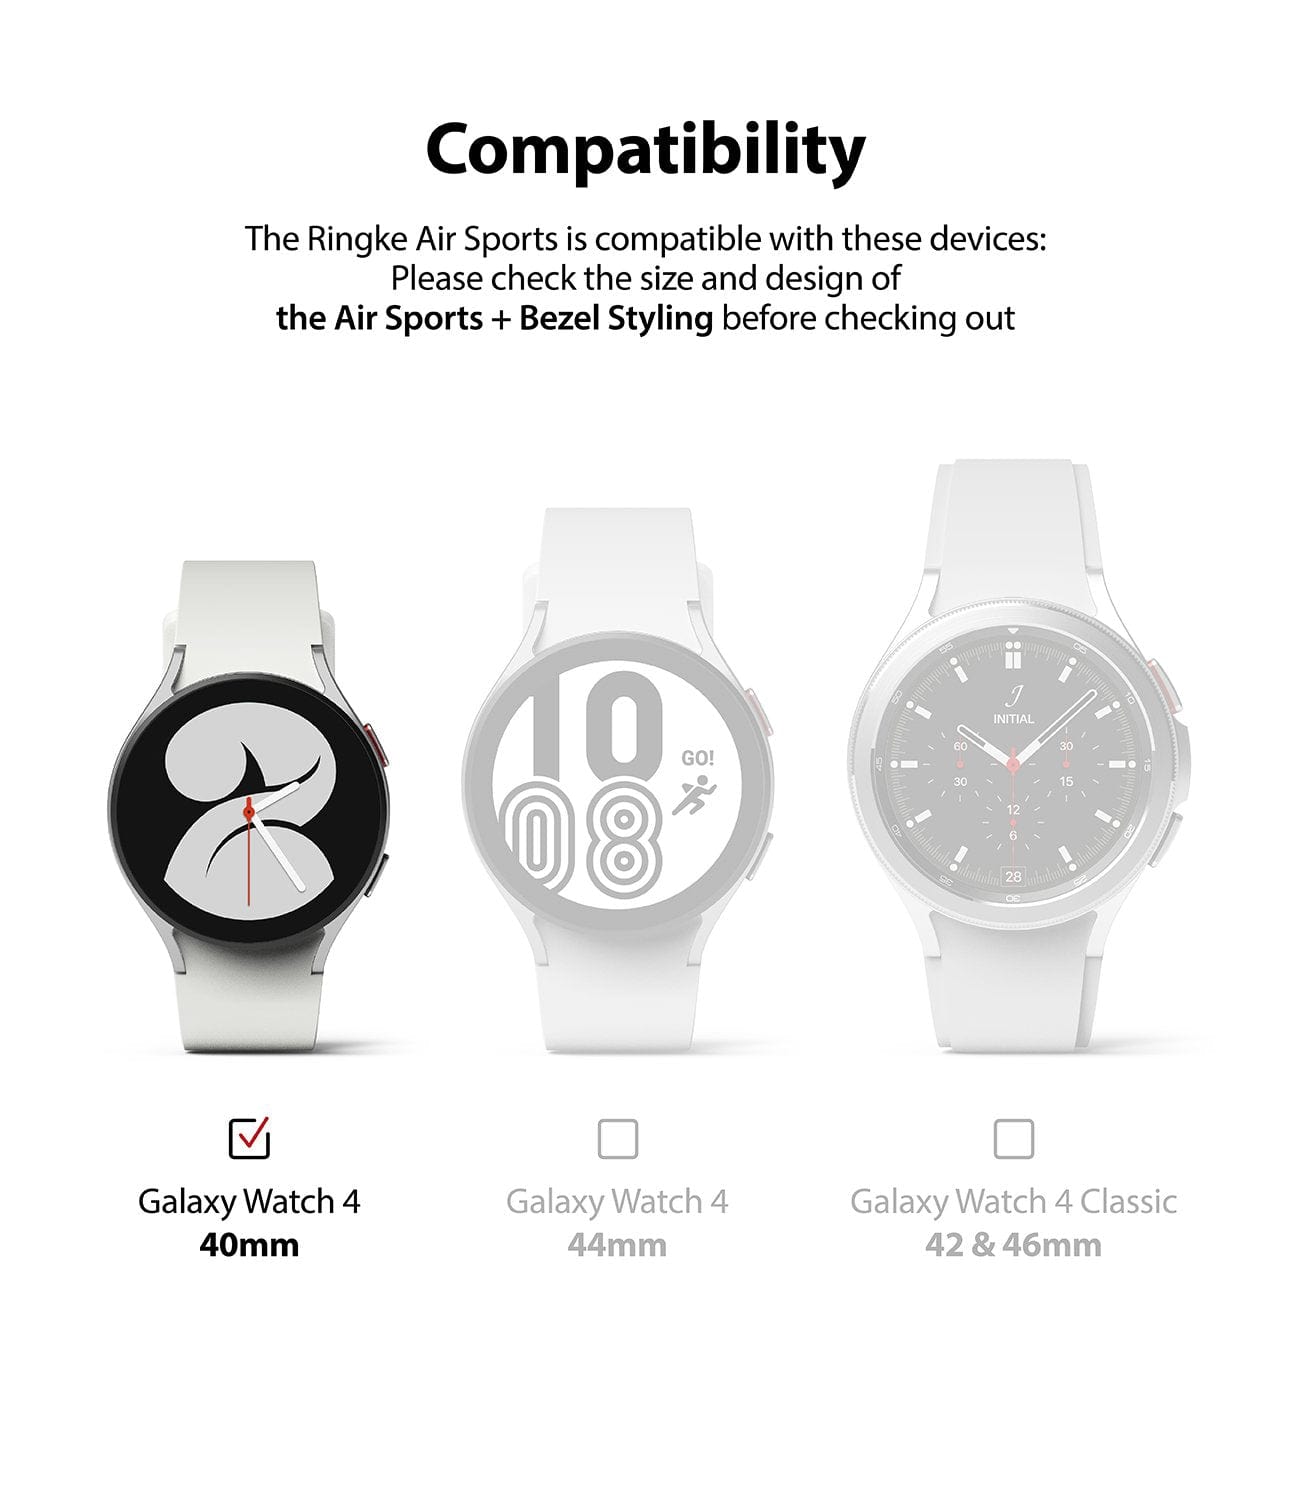 This package is fully compatible with the Air Sports case and bezel styling, ensuring seamless integration and enhanced protection for your Galaxy Watch 4.